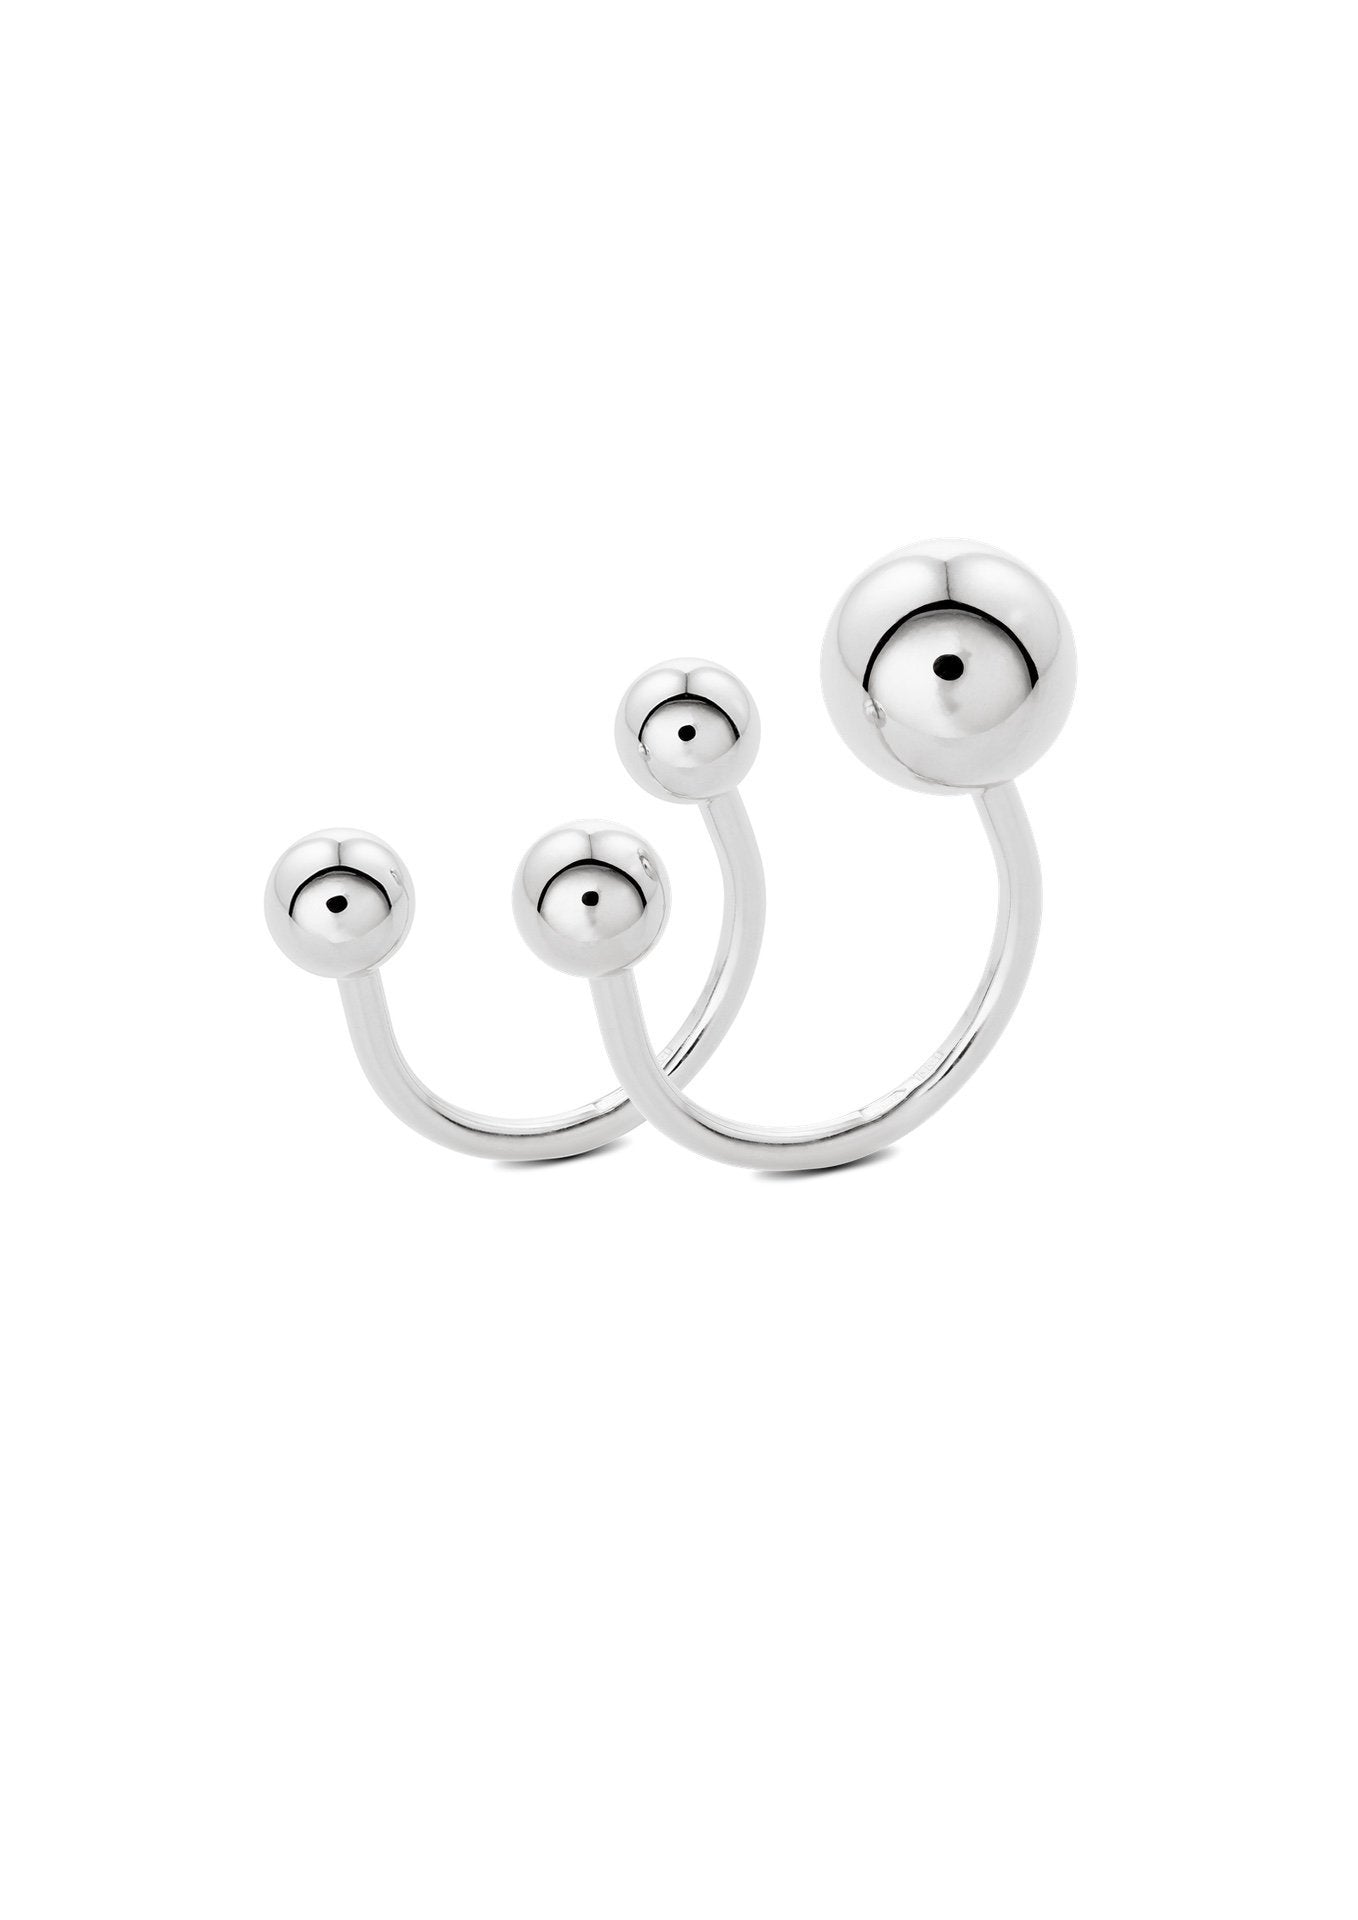 NO MORE accessories Bomb Rings duo in Sterling Silver